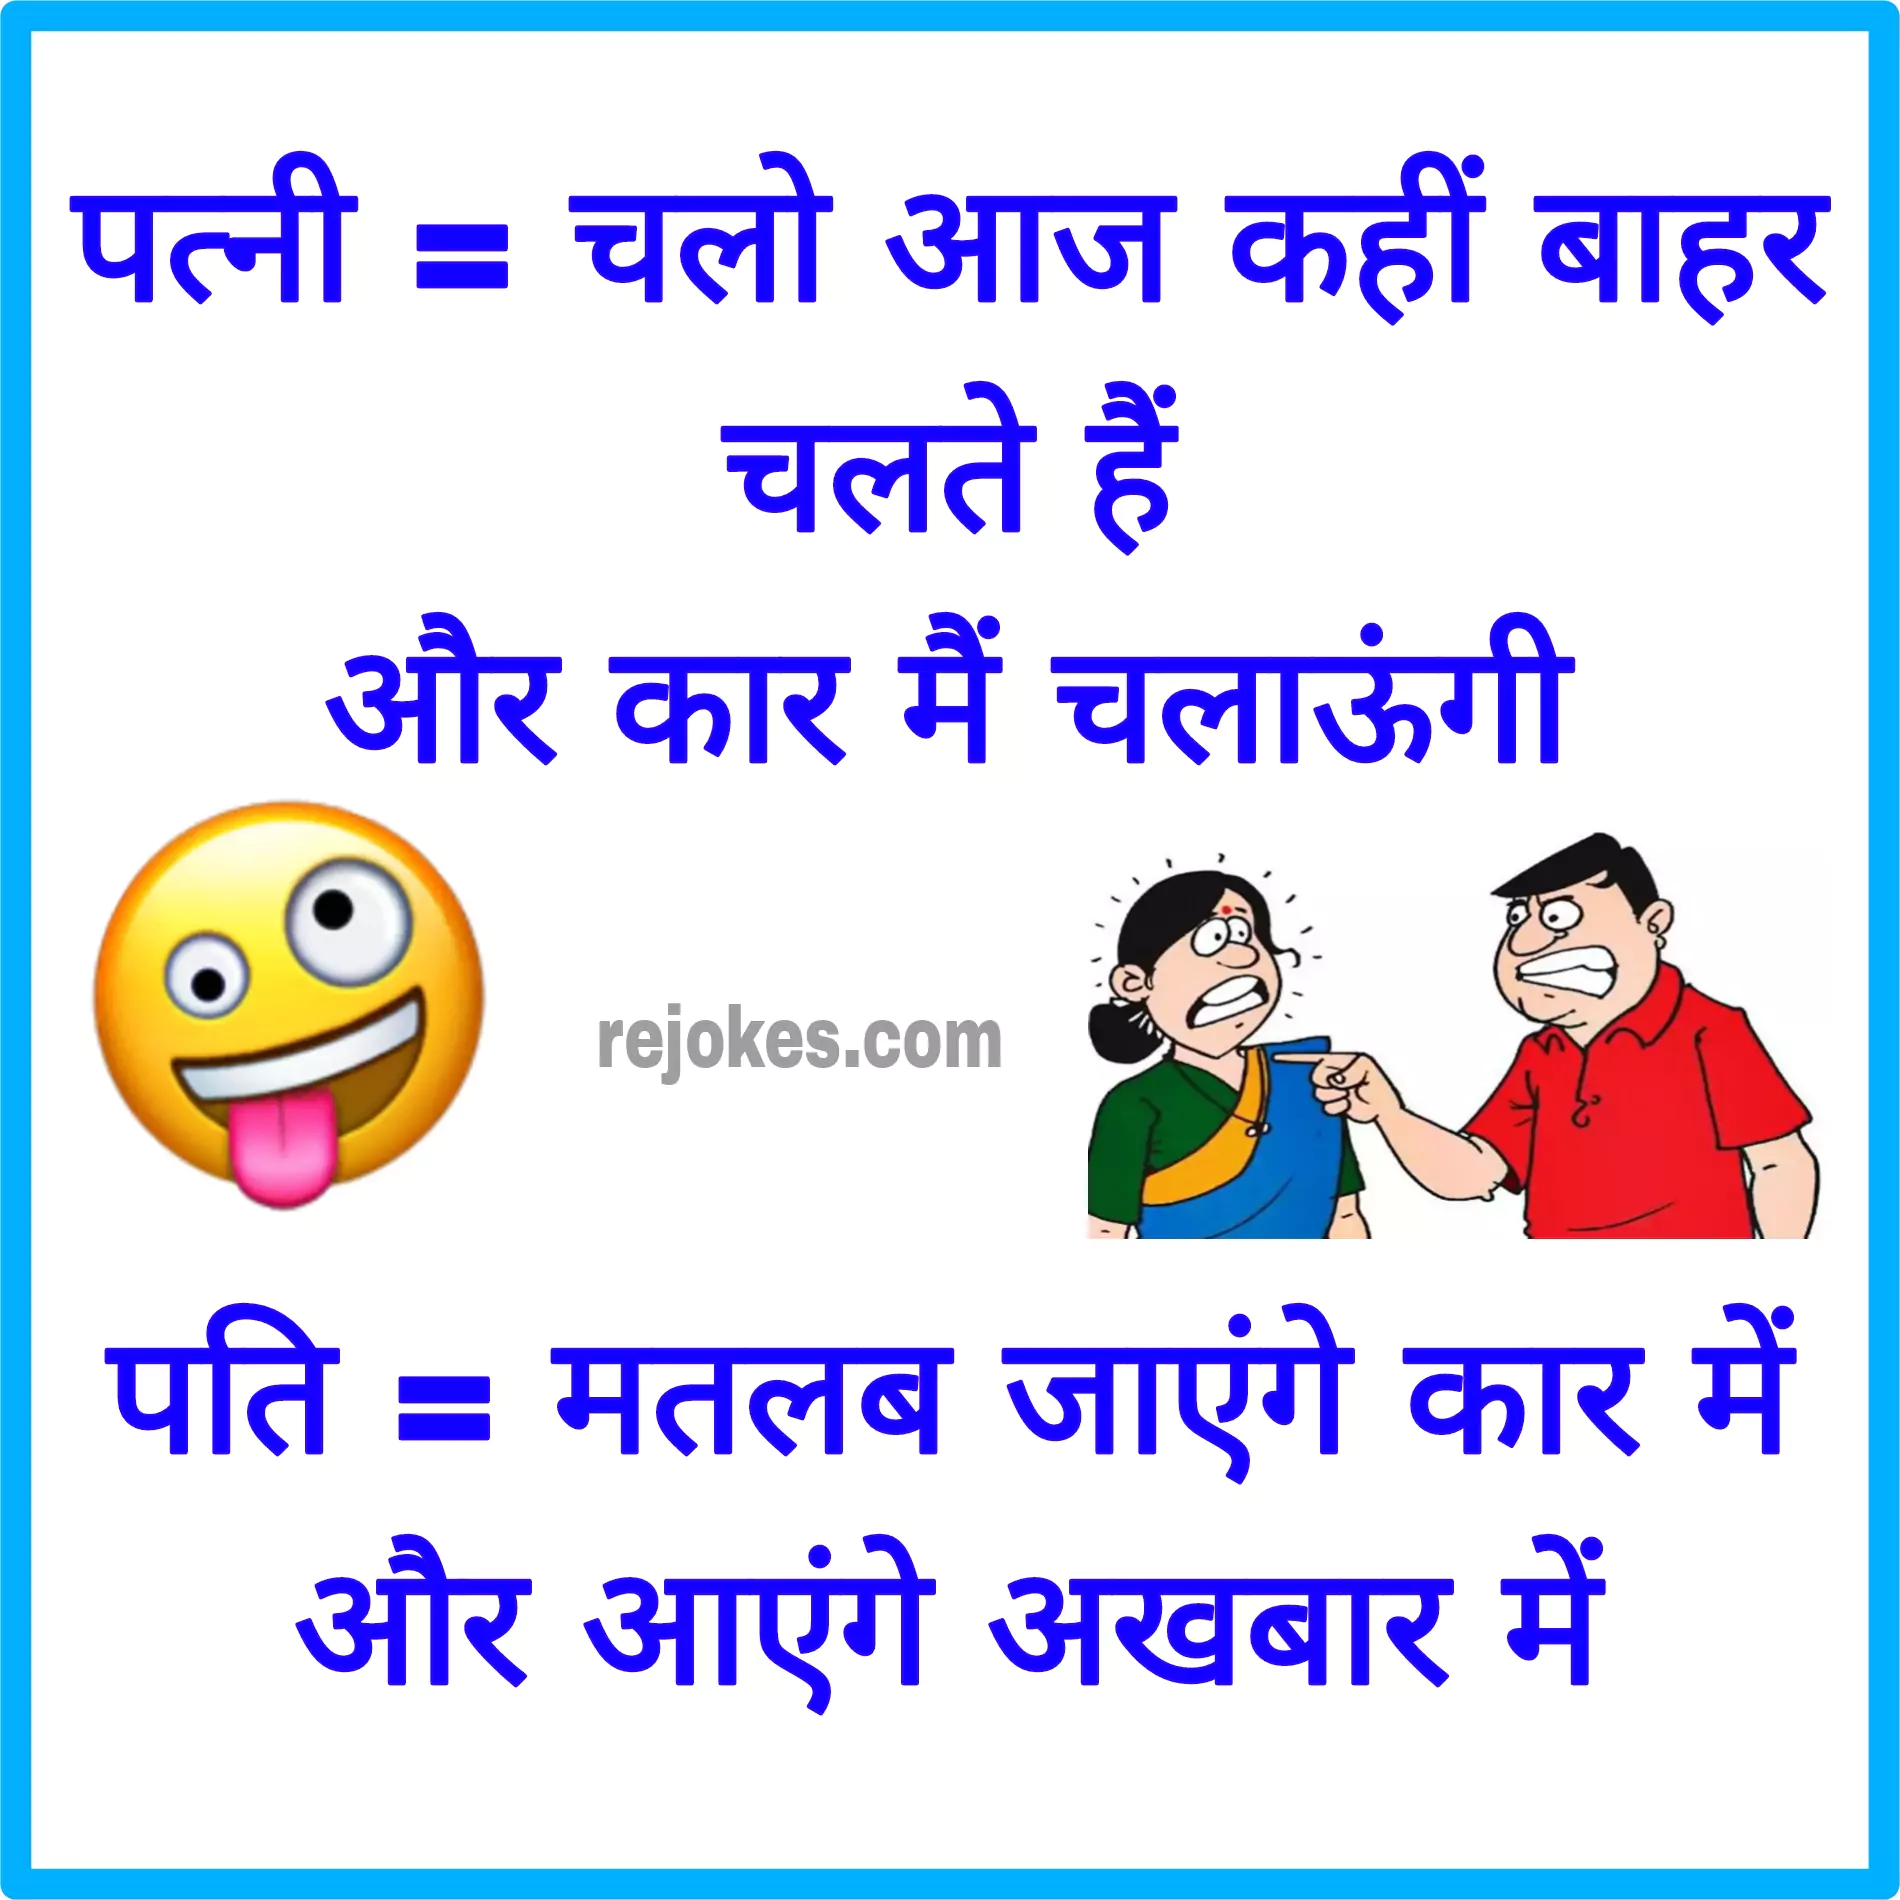 hindi-jokes-images-for-husband-wife-download